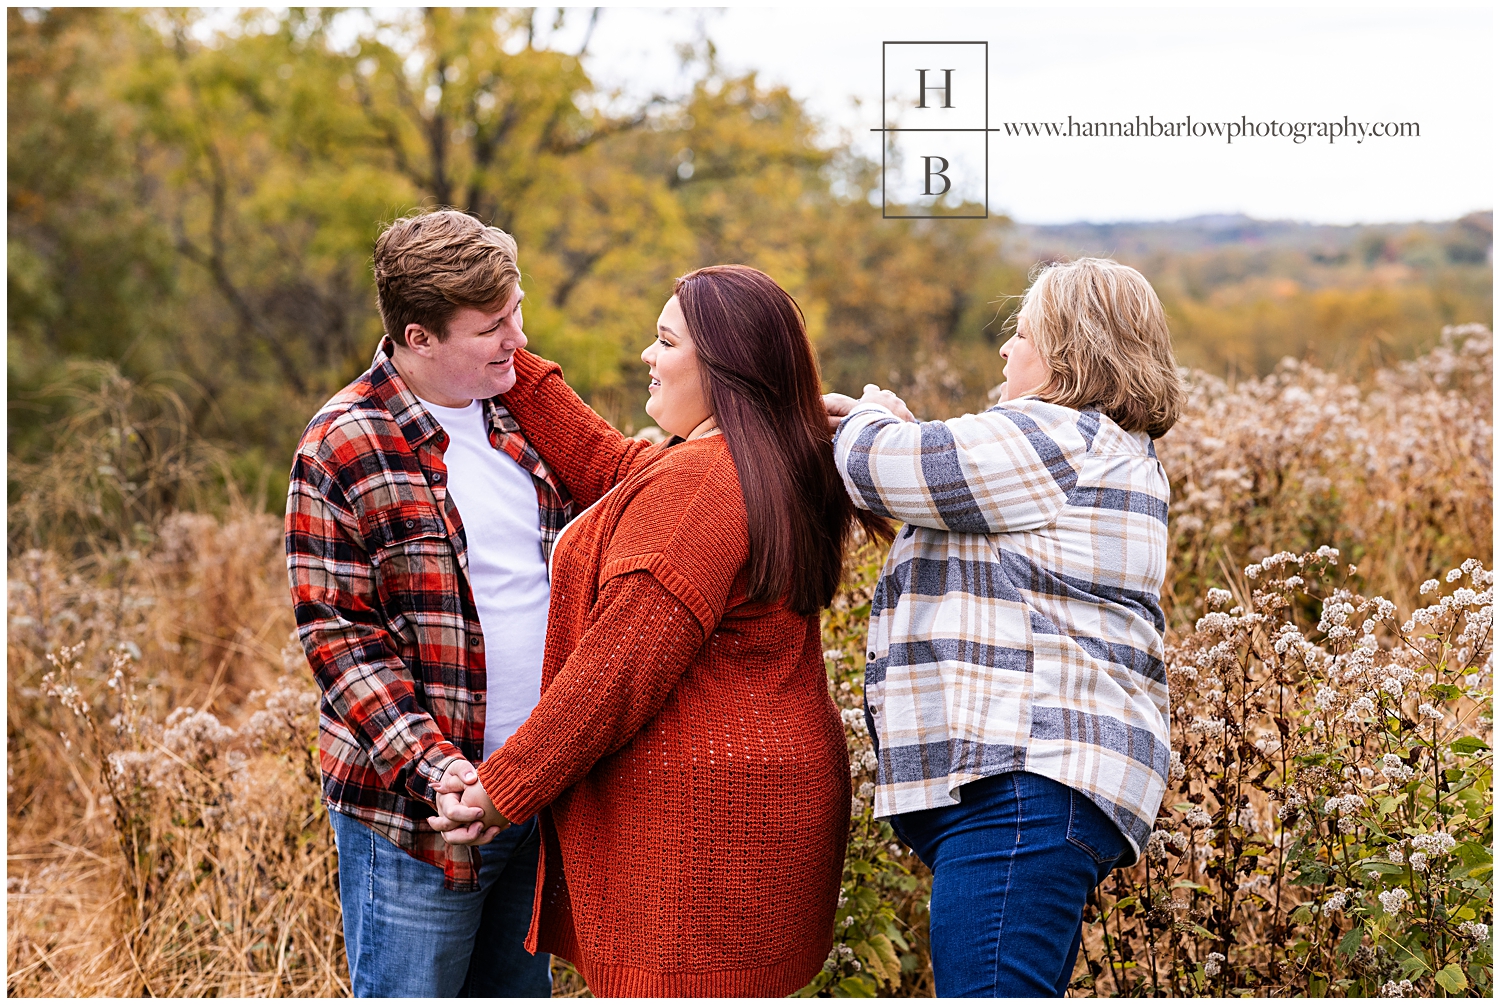 Mom fixes daughters hair for engagement photos in field.